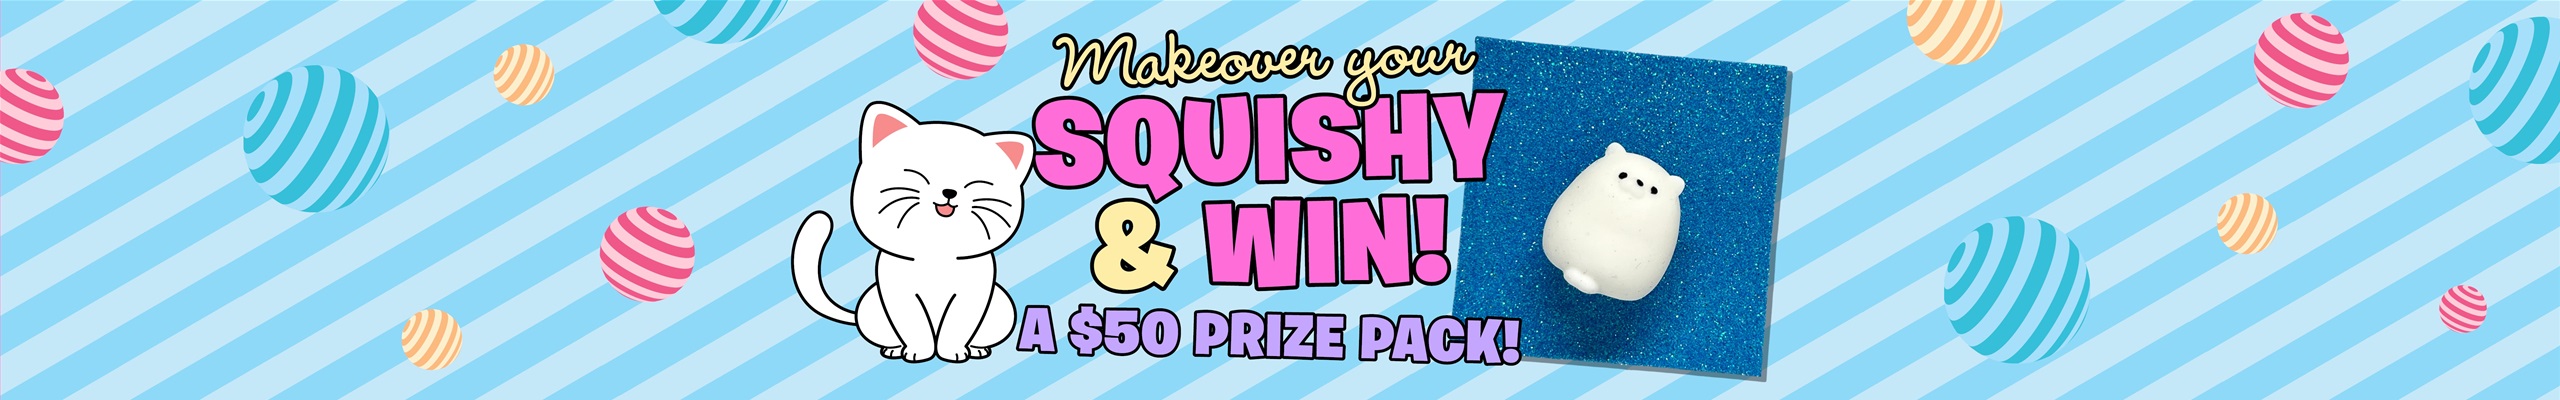 Makeover your Cool Kitty Squishy & WIN!